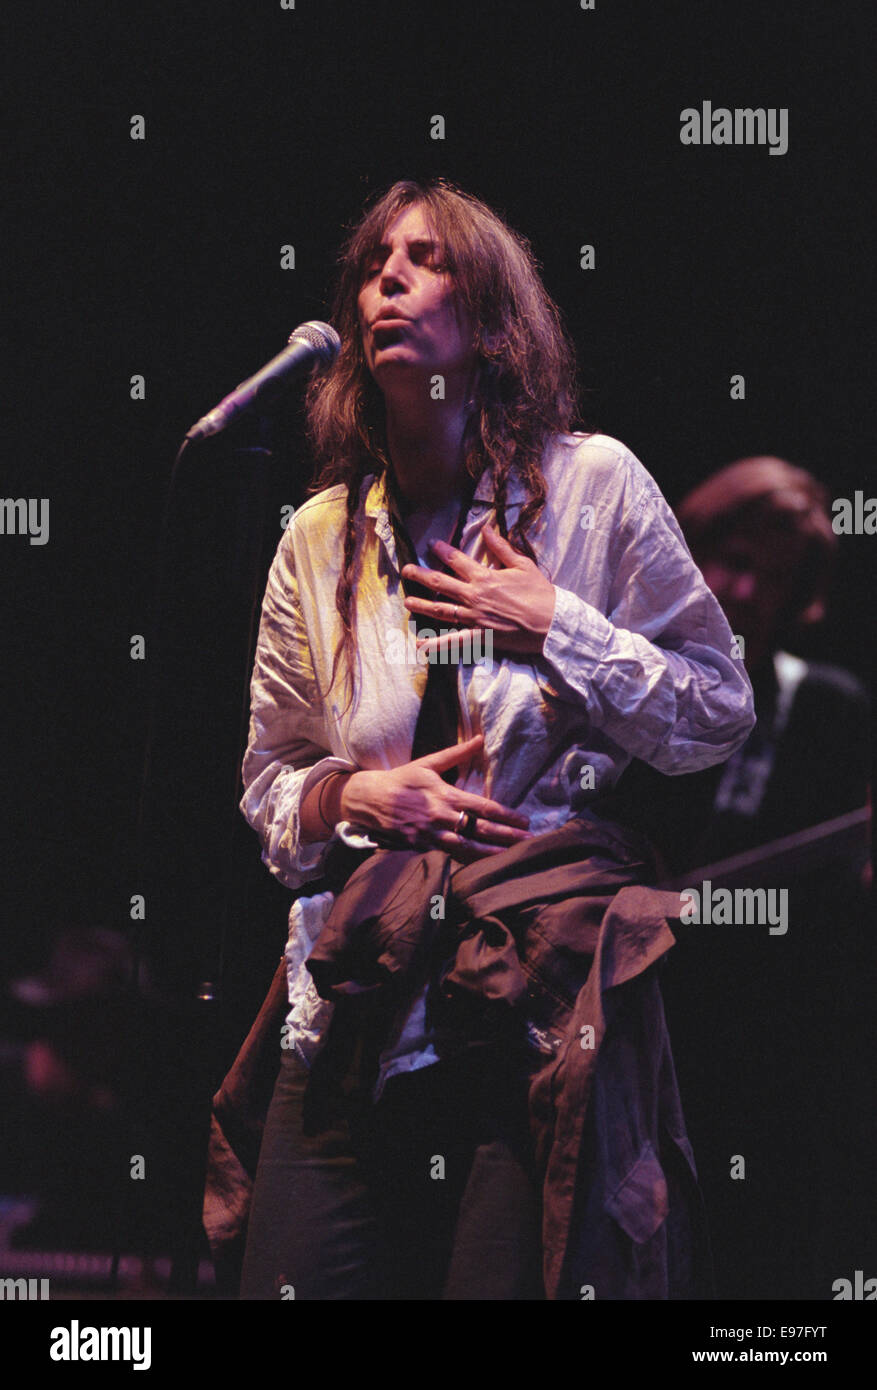 American poet singer Patti Smith in concert at Glasgow Royal Concert Hall, in Glasgow, Scotland, in 1996. Stock Photo